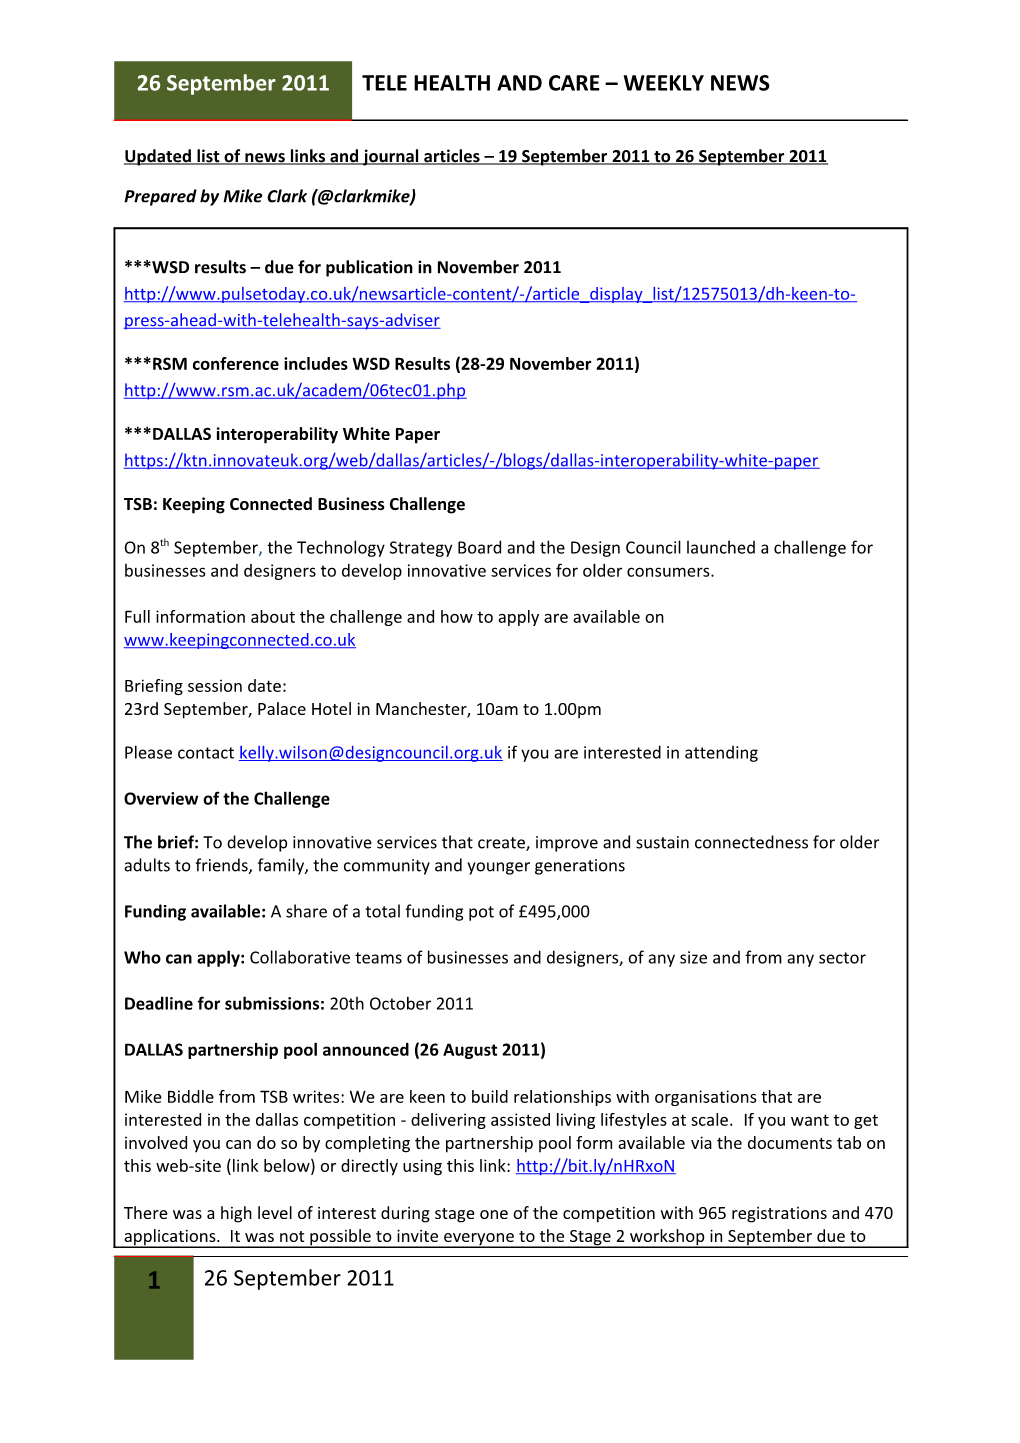 Updated List of News Links and Journal Articles 19September 2011 To26september 2011